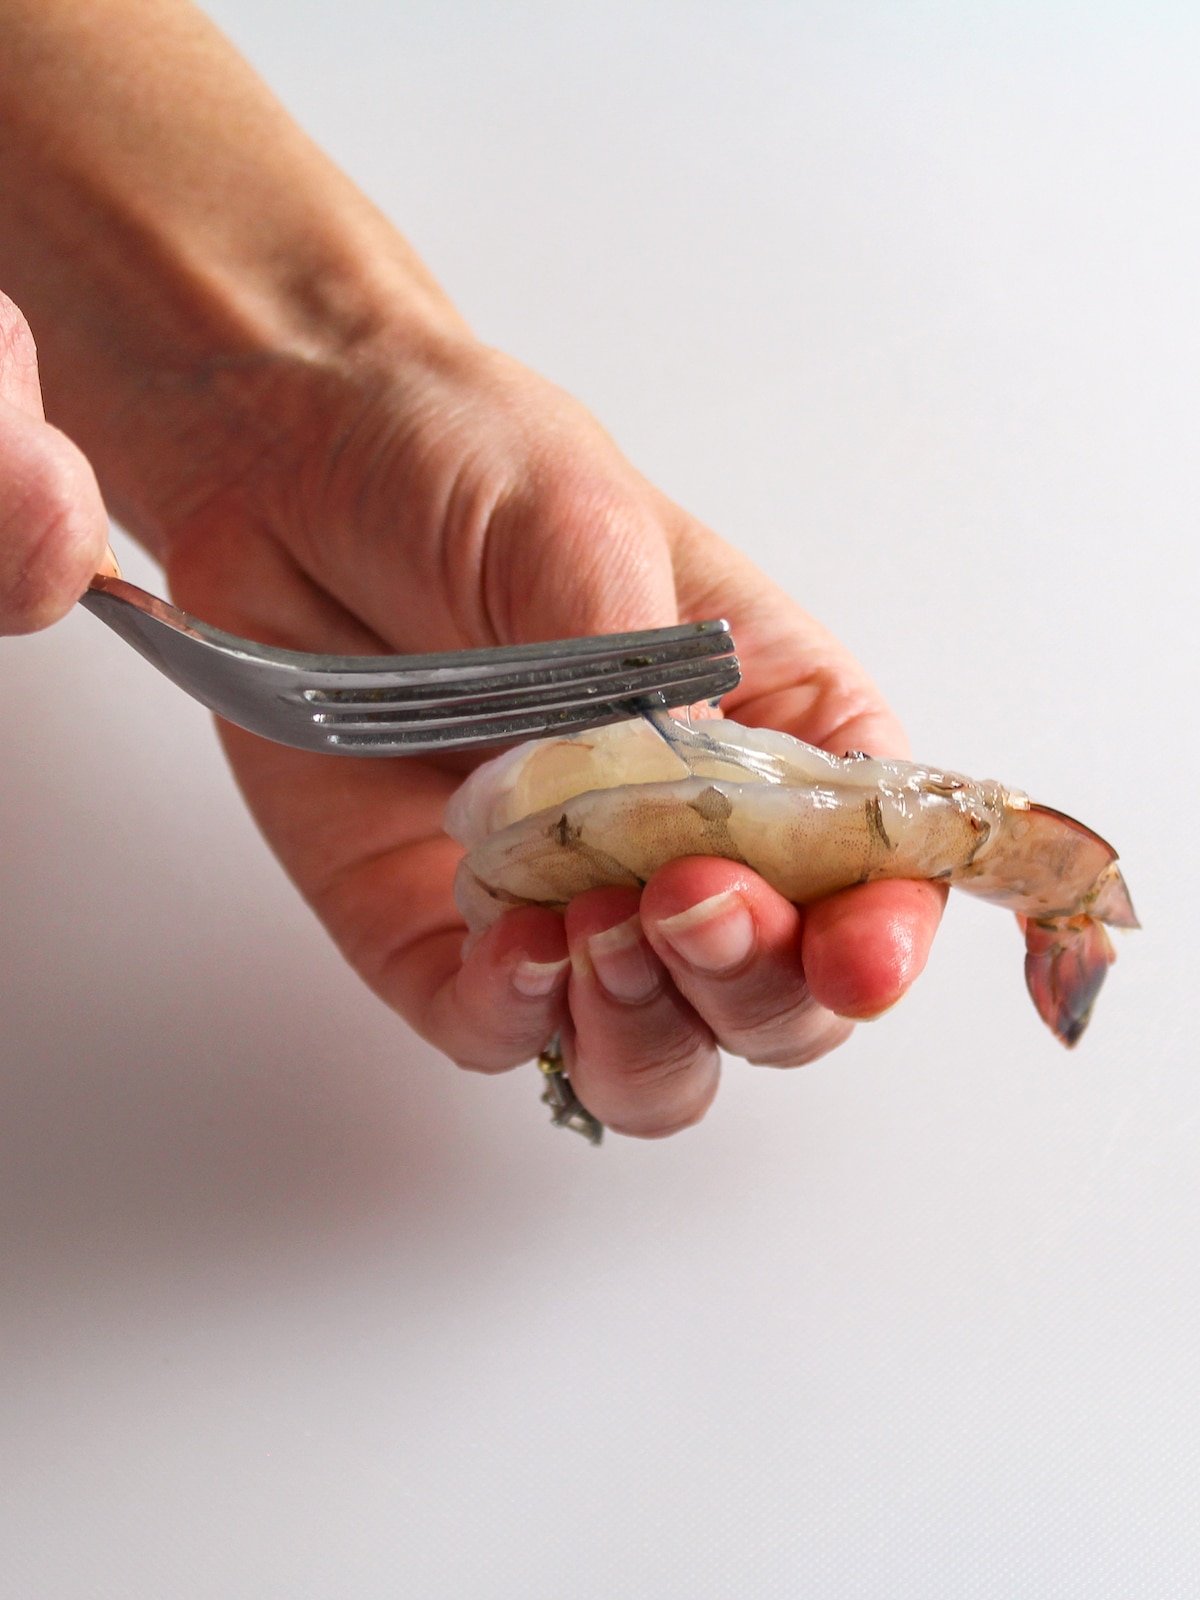 Cleaning and removing the vein from shrimp.